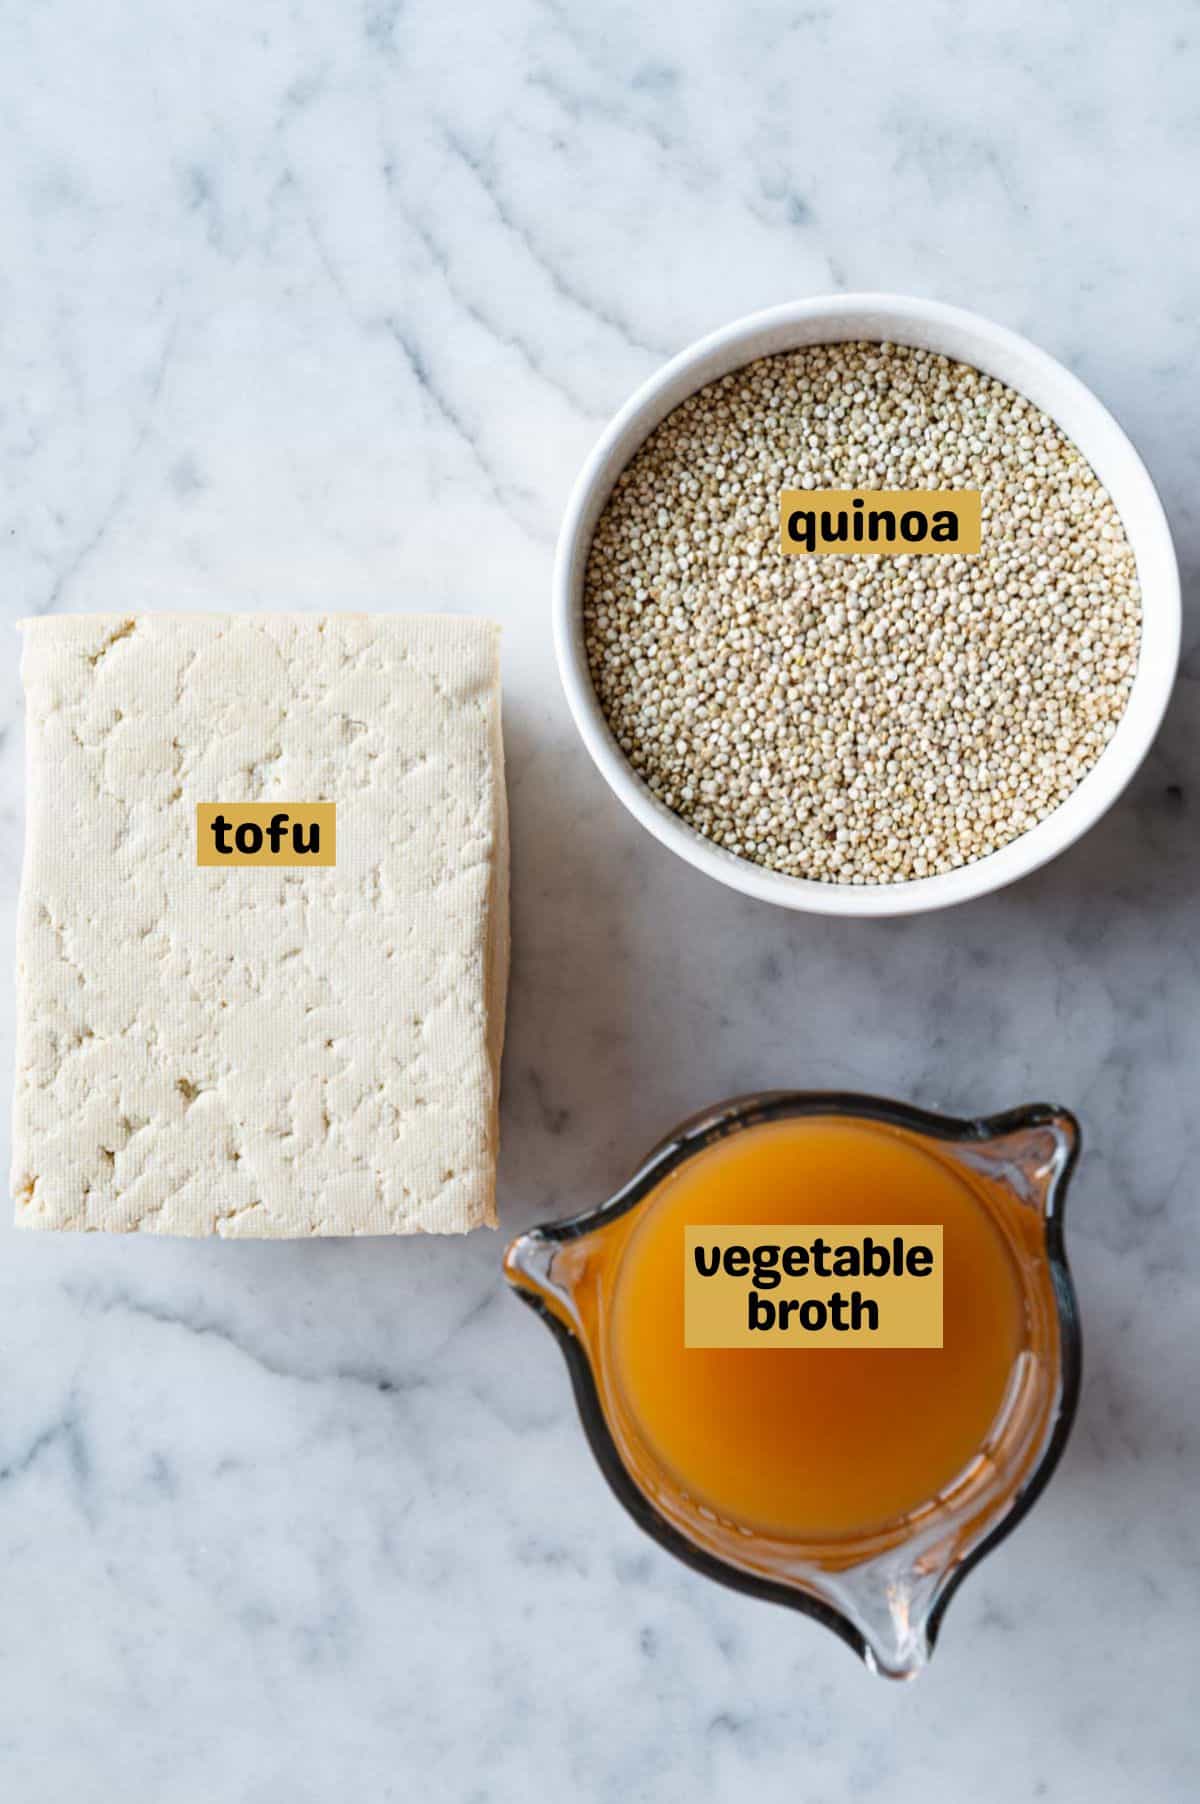 Dry quinoa in a white bowl with vegetable broth, and a block of extra-firm tofu.